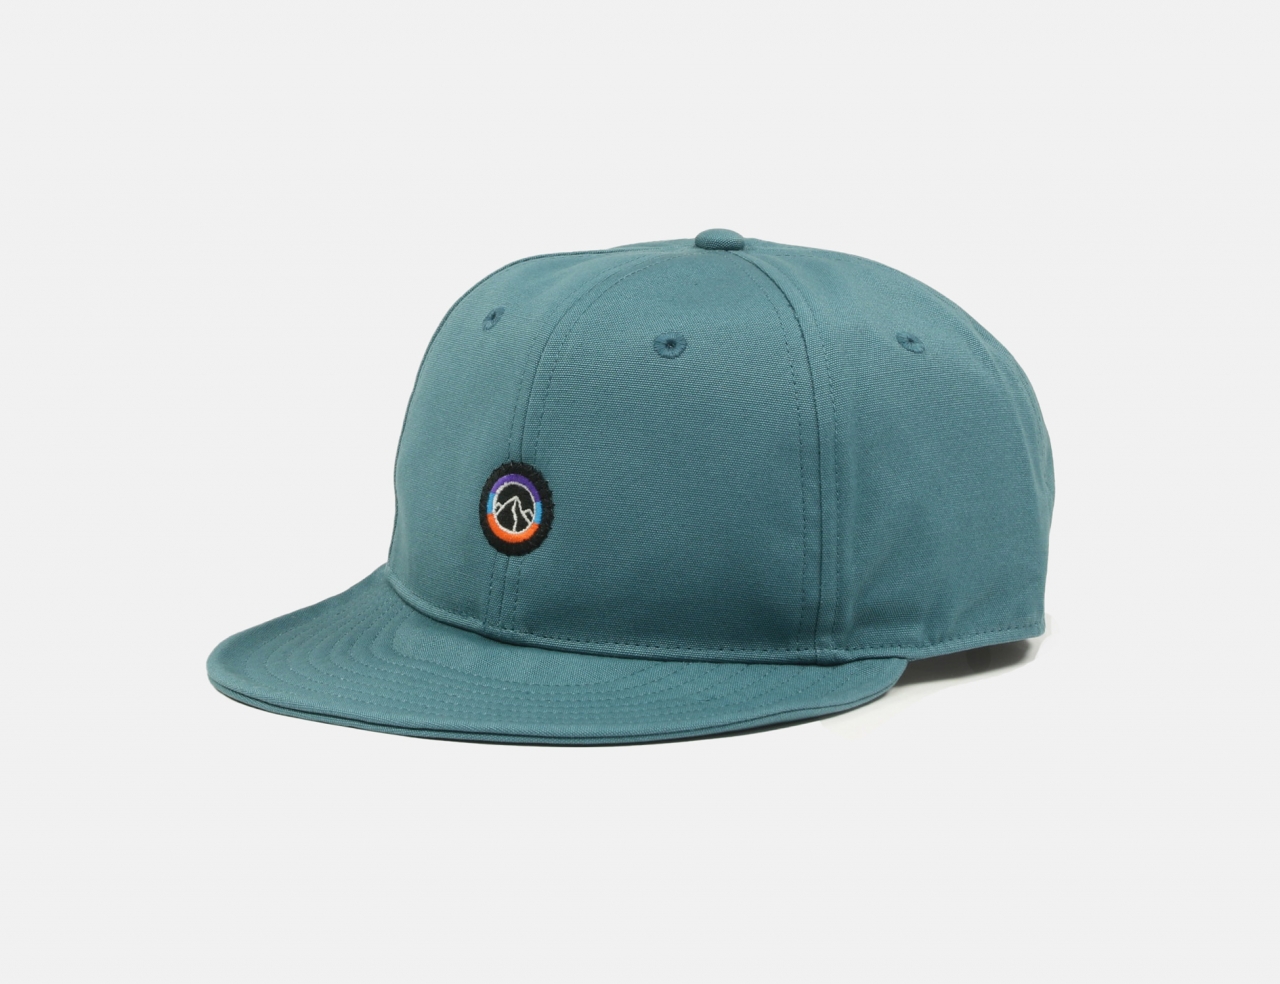 Patagonia Scrap Everyday Cap - Fitz Roy Icon: Abalone Blue